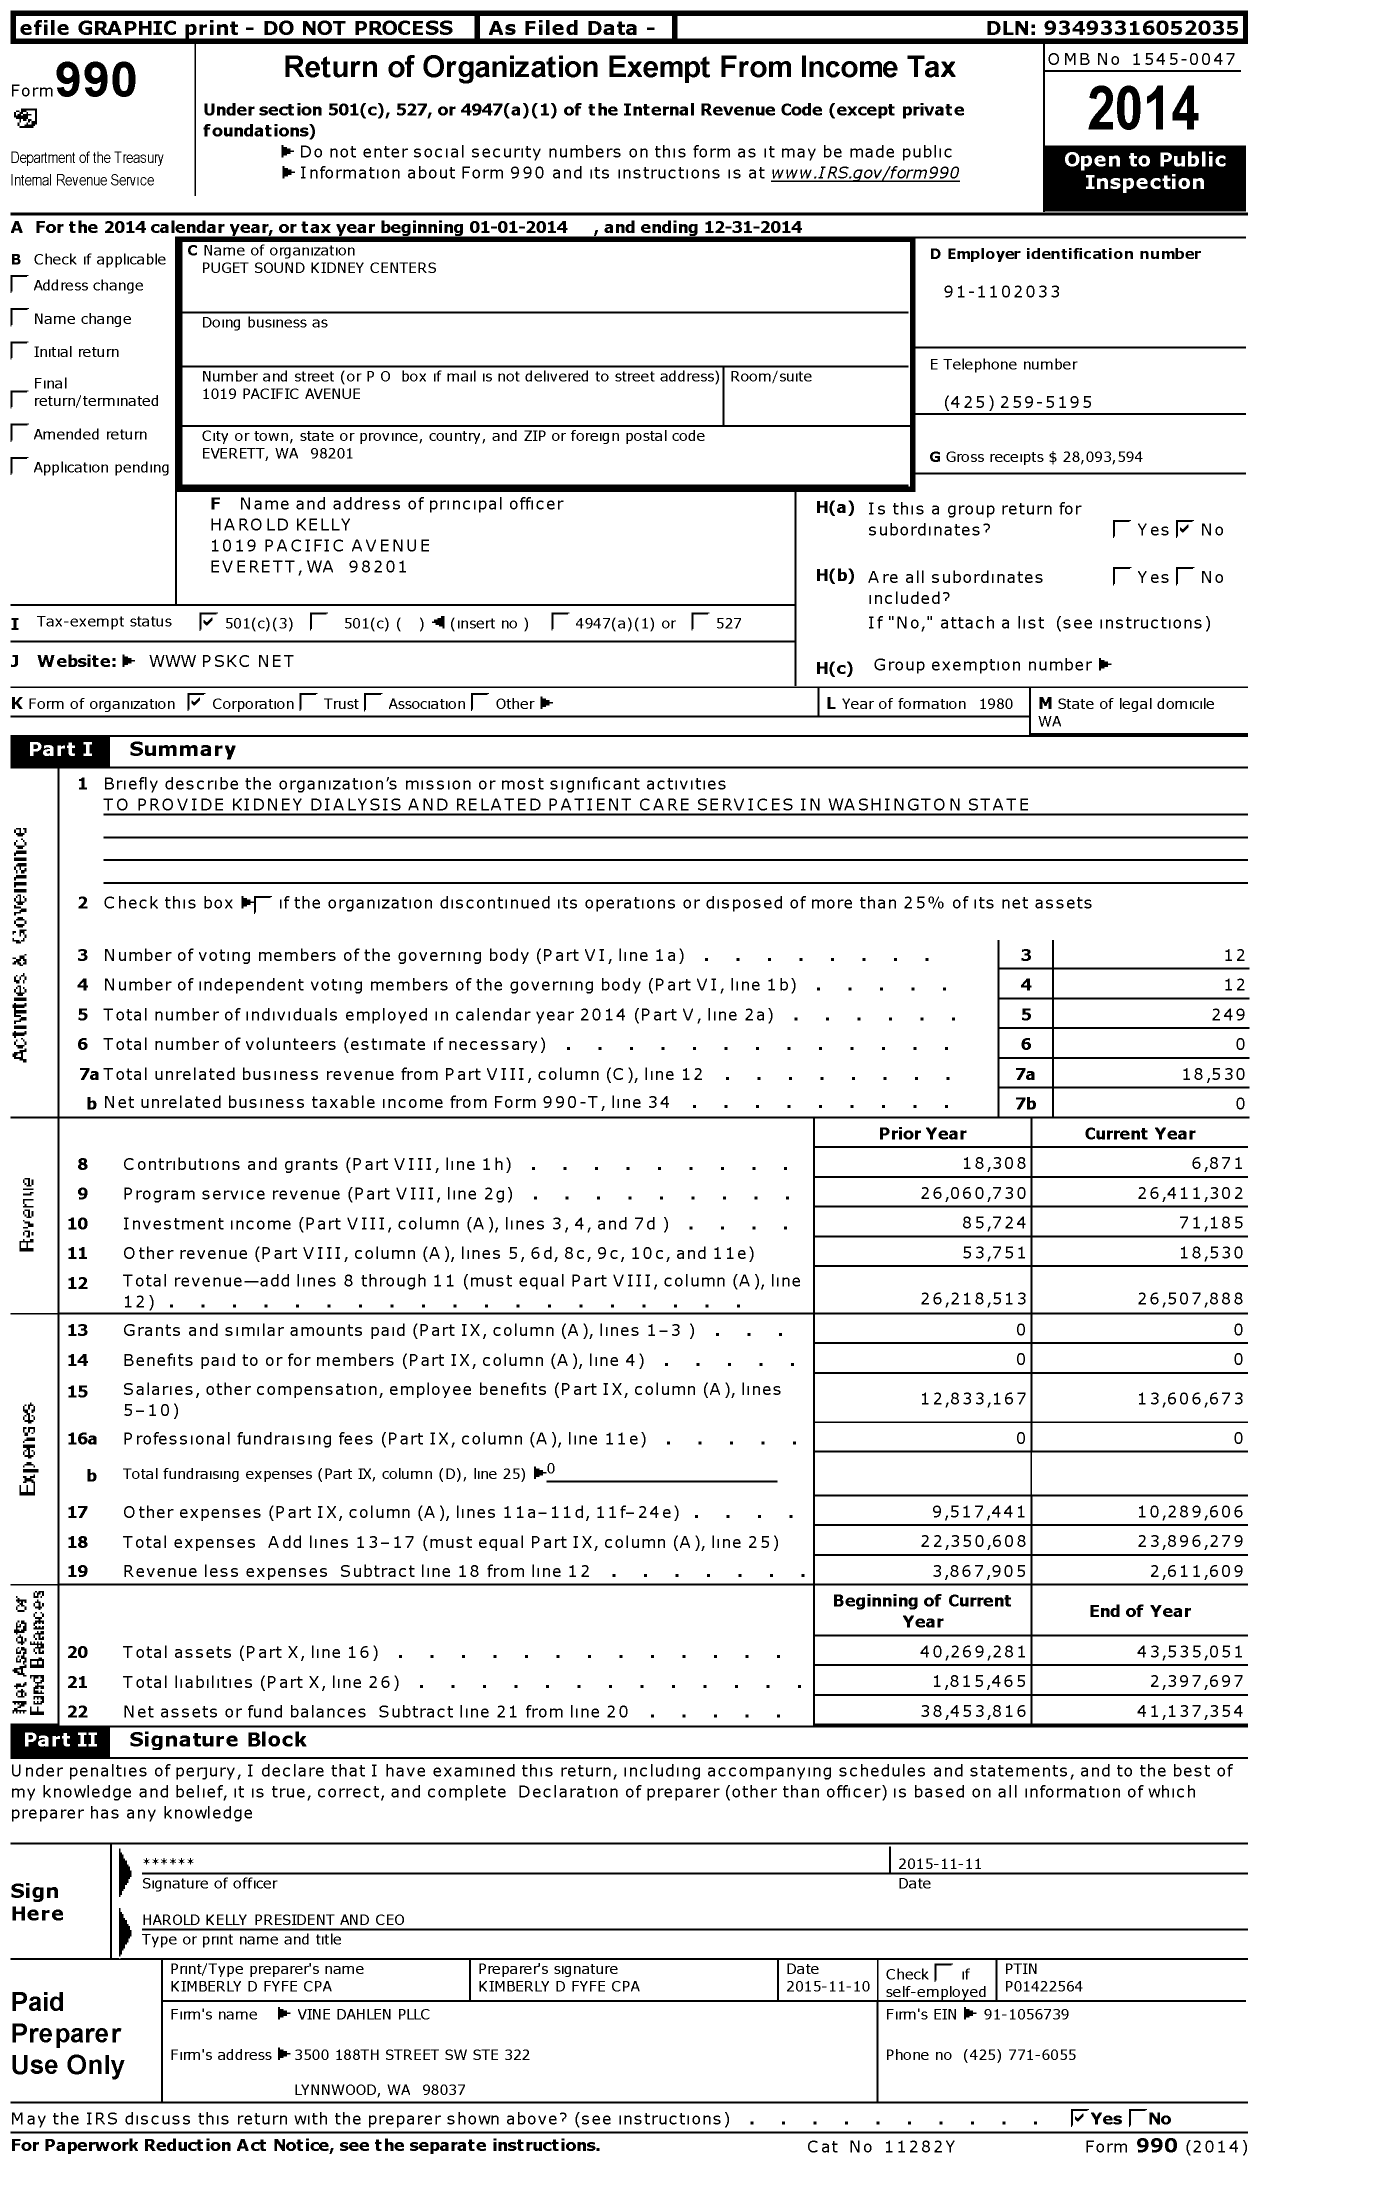 Image of first page of 2014 Form 990 for Puget Sound Kidney Centers (PSKC)